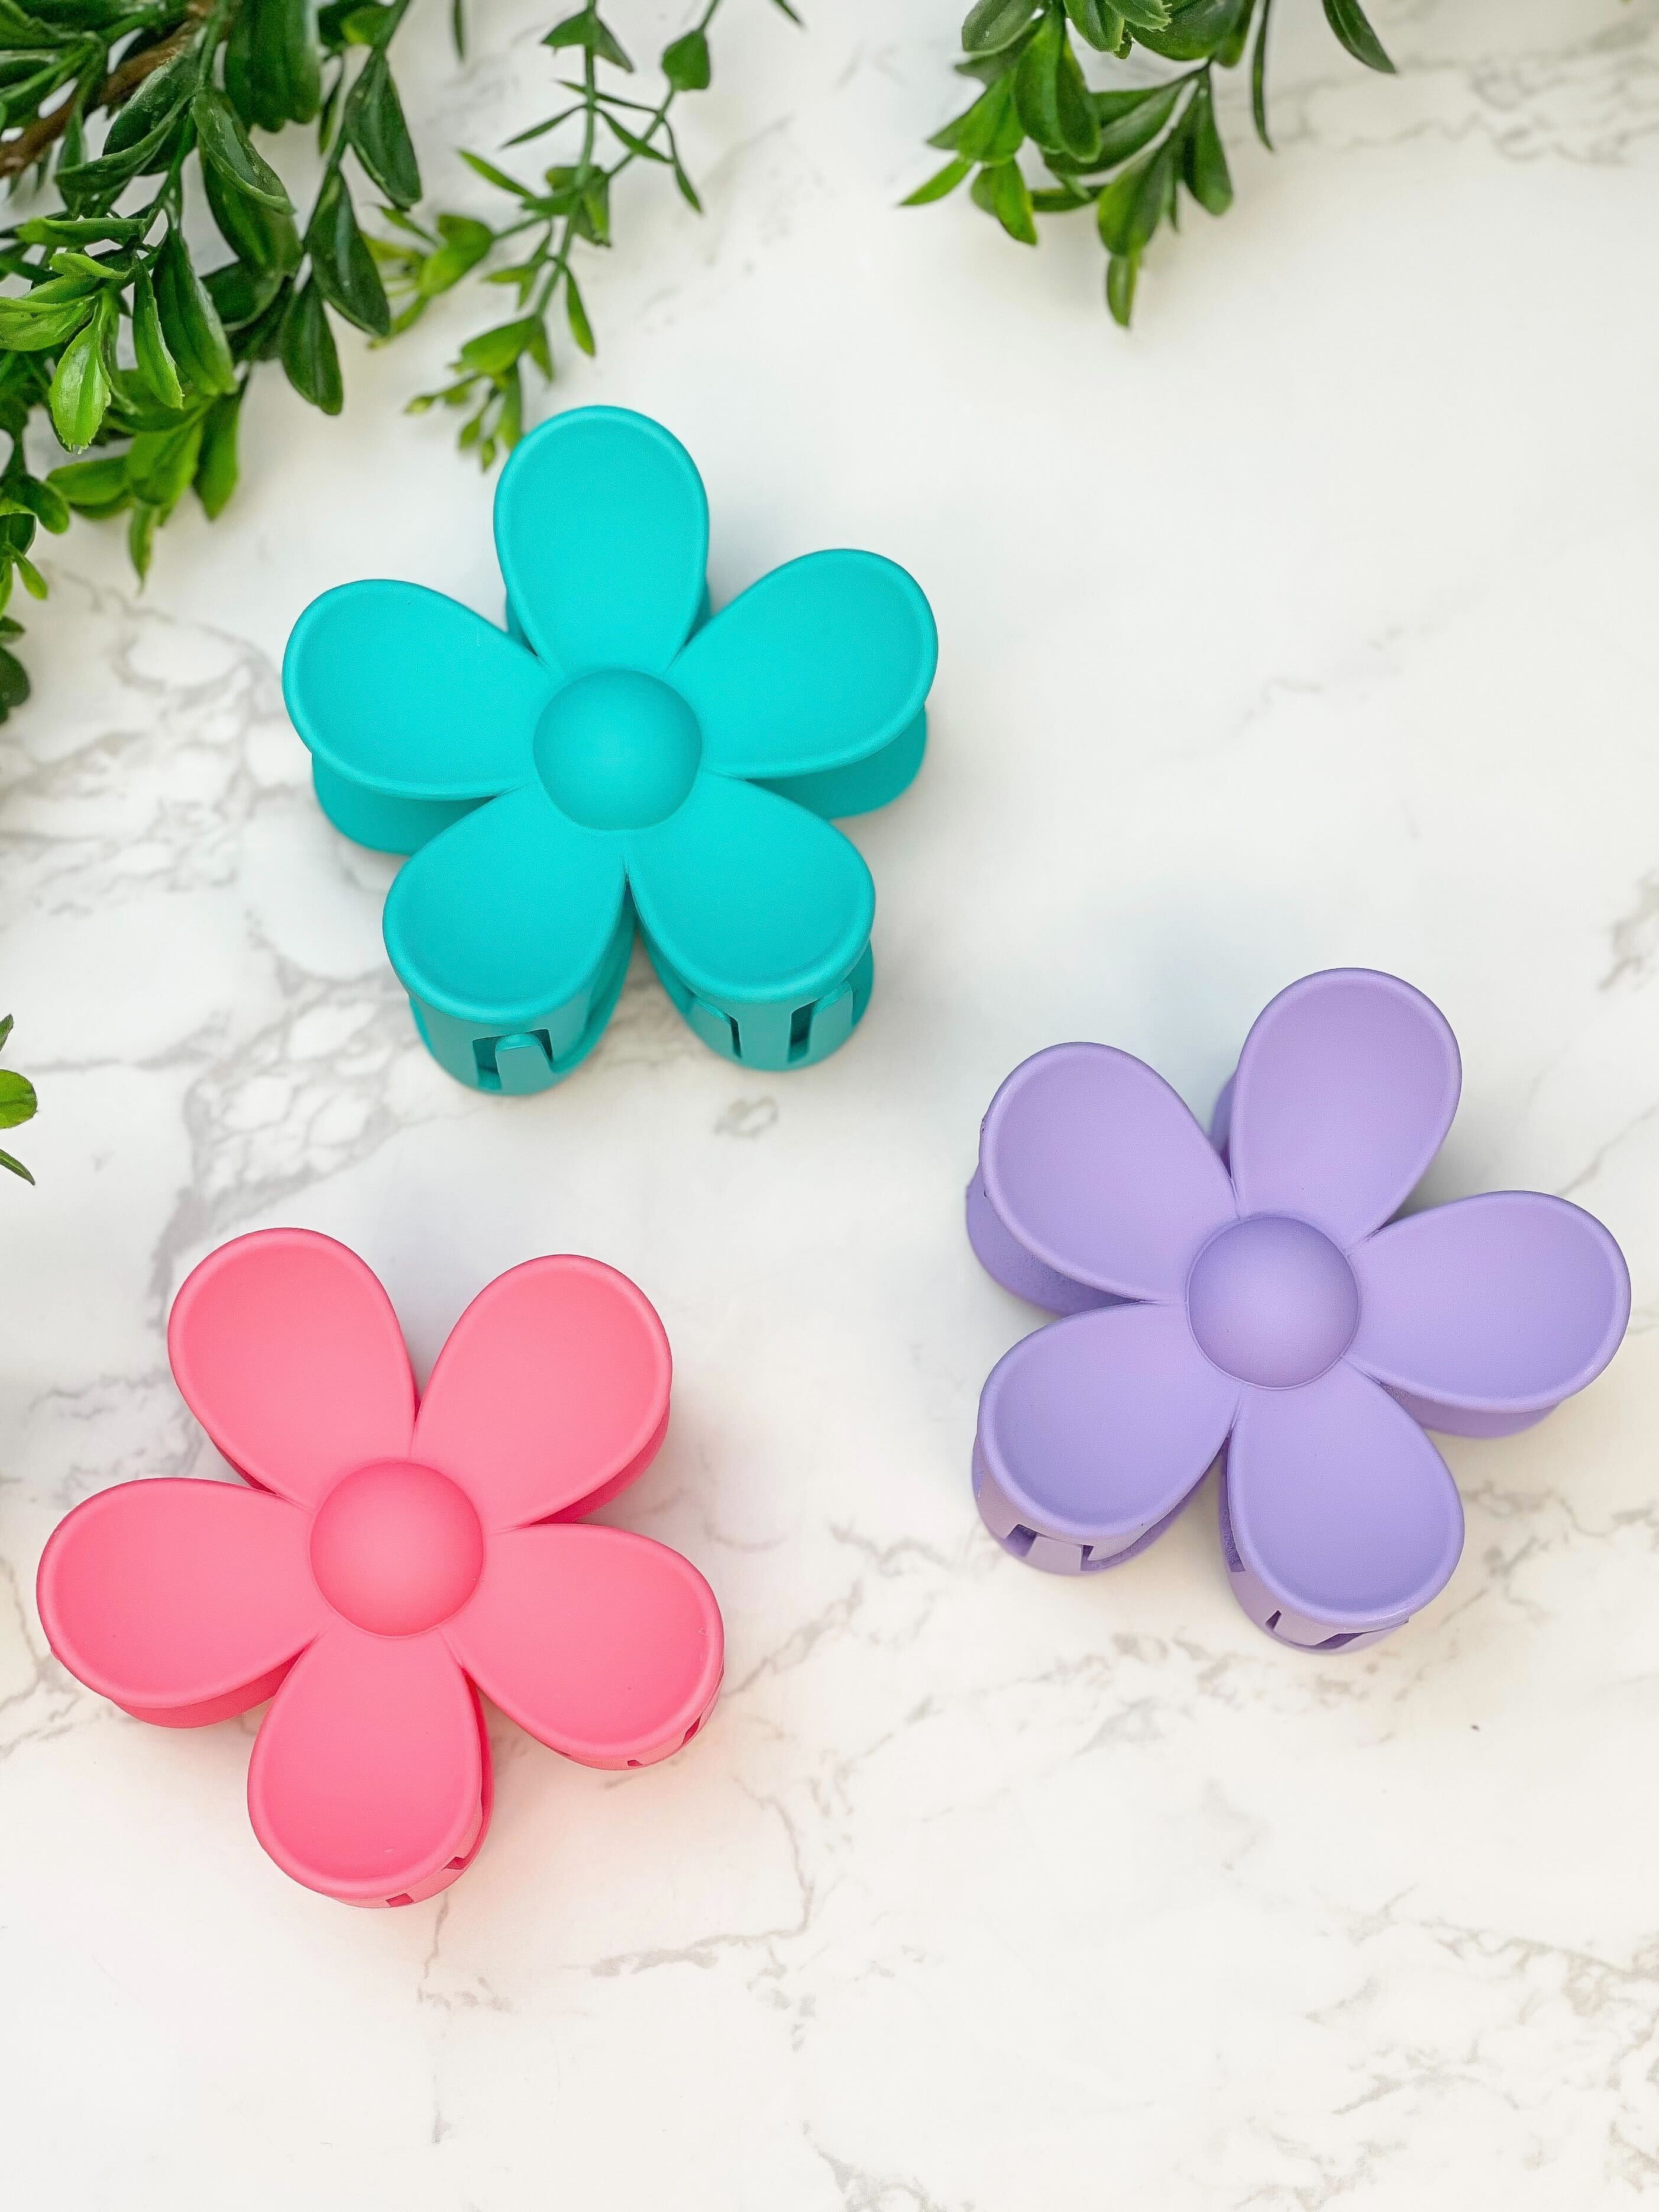 Flower-Shaped Hair Clip - Hot Pink